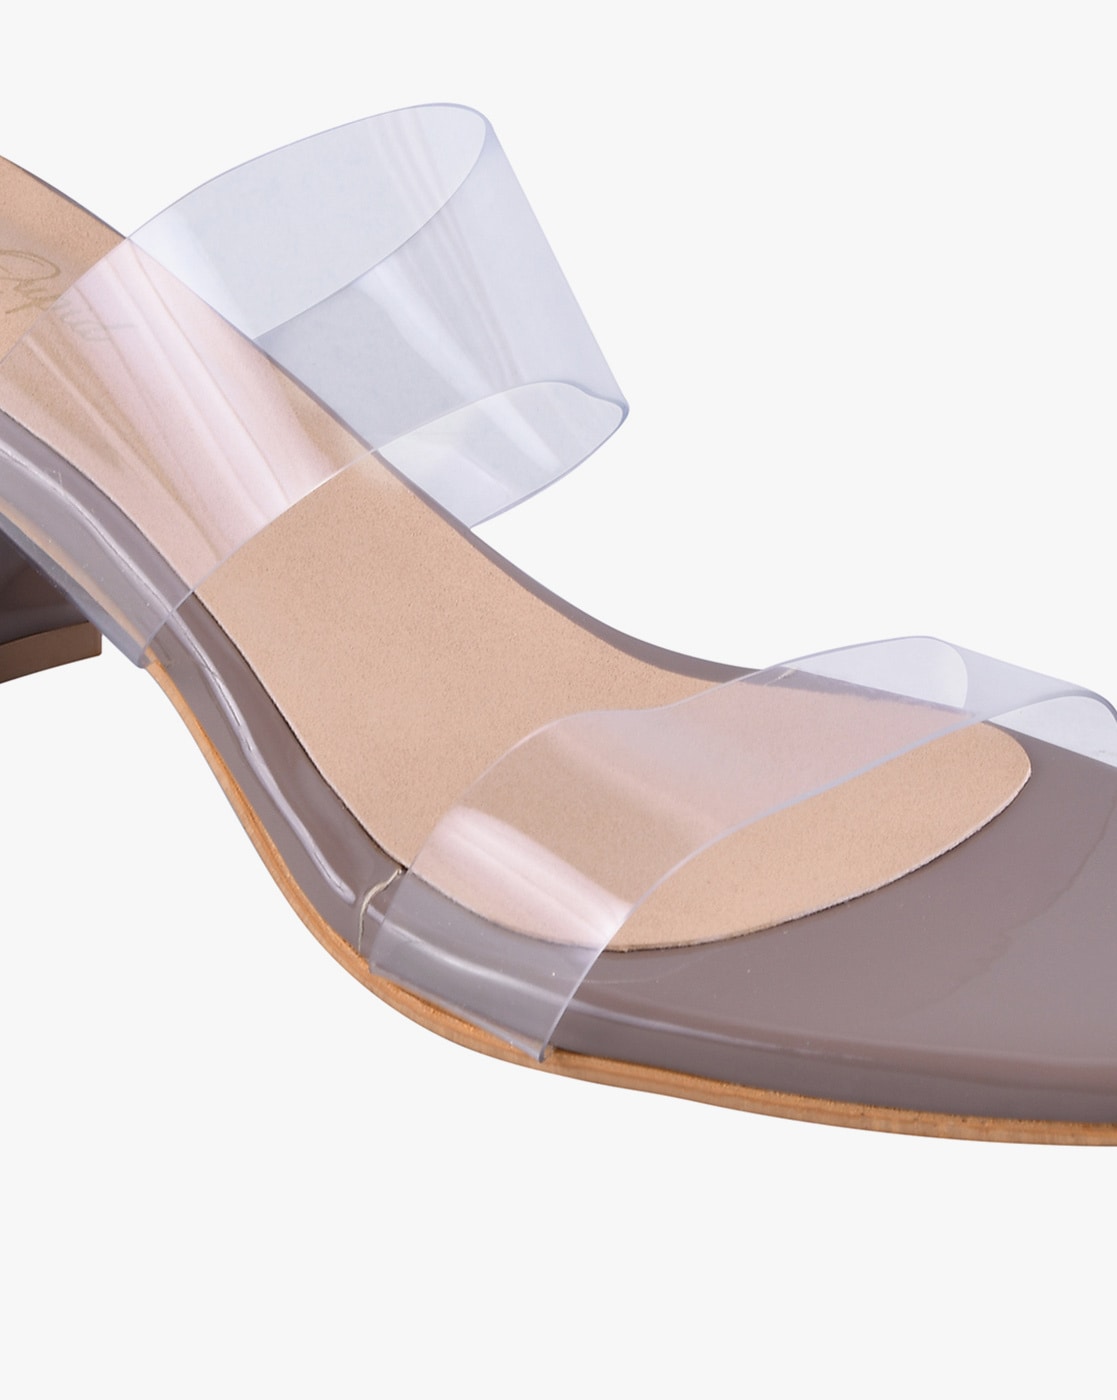 Hanna Transparent Heeled Sandal in Clear - Get great deals at JustFab